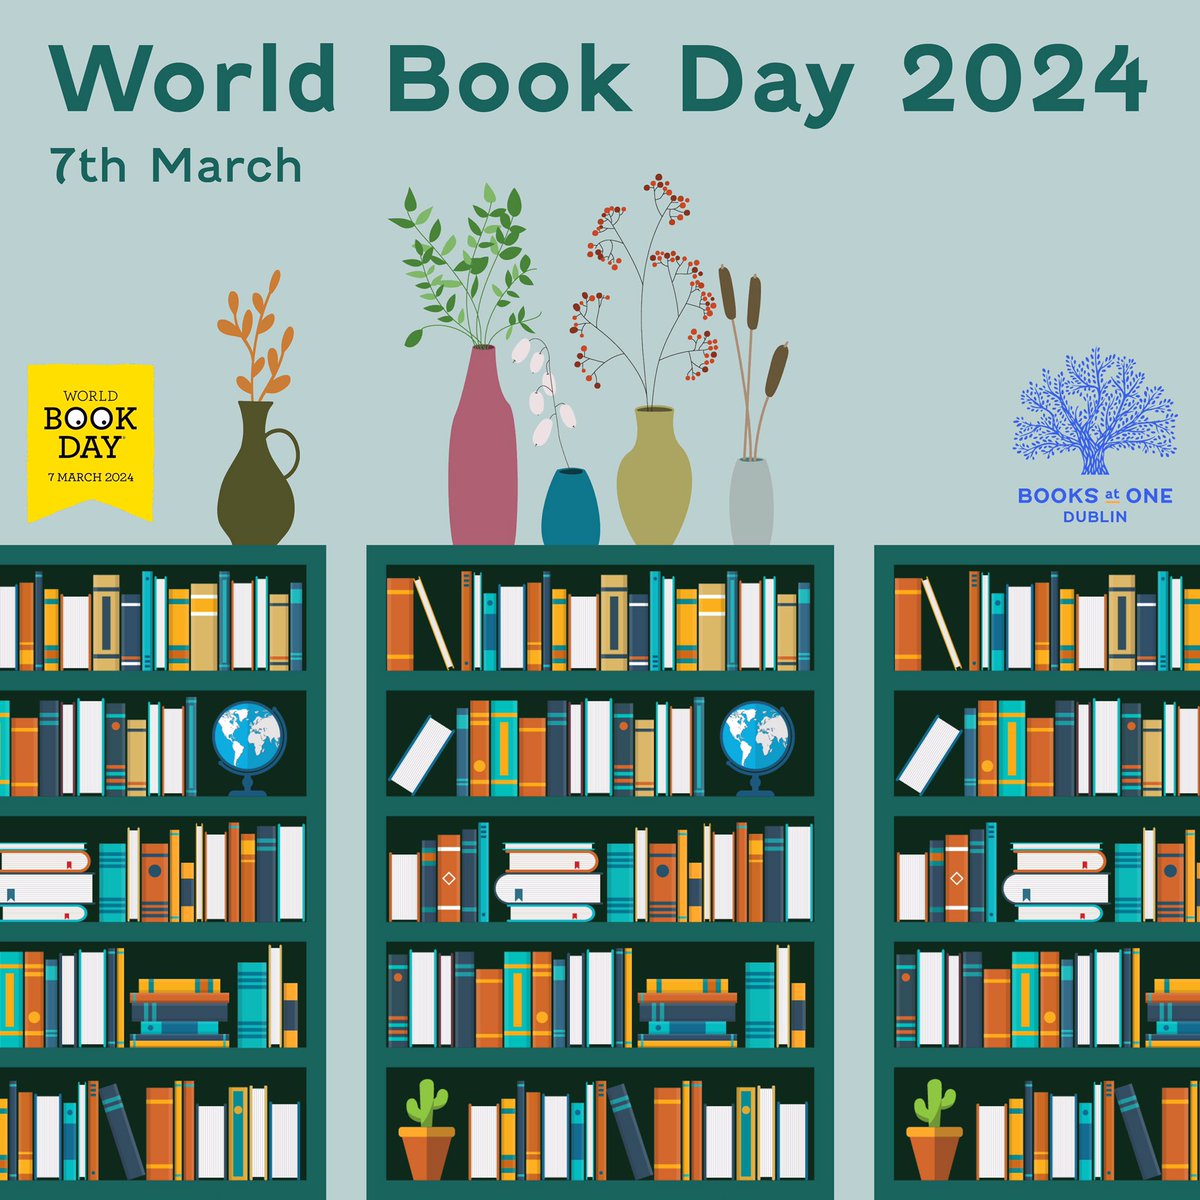 World Book Day is here! A great day to support independent bookshops 😆📚 Drop into us on Meath Street and see what titles we have! 🌍 • • • #booksatonedublin #theliberties #dublinartscouncil #shoplocal #newreleases #booksatonefamily #worldbookday